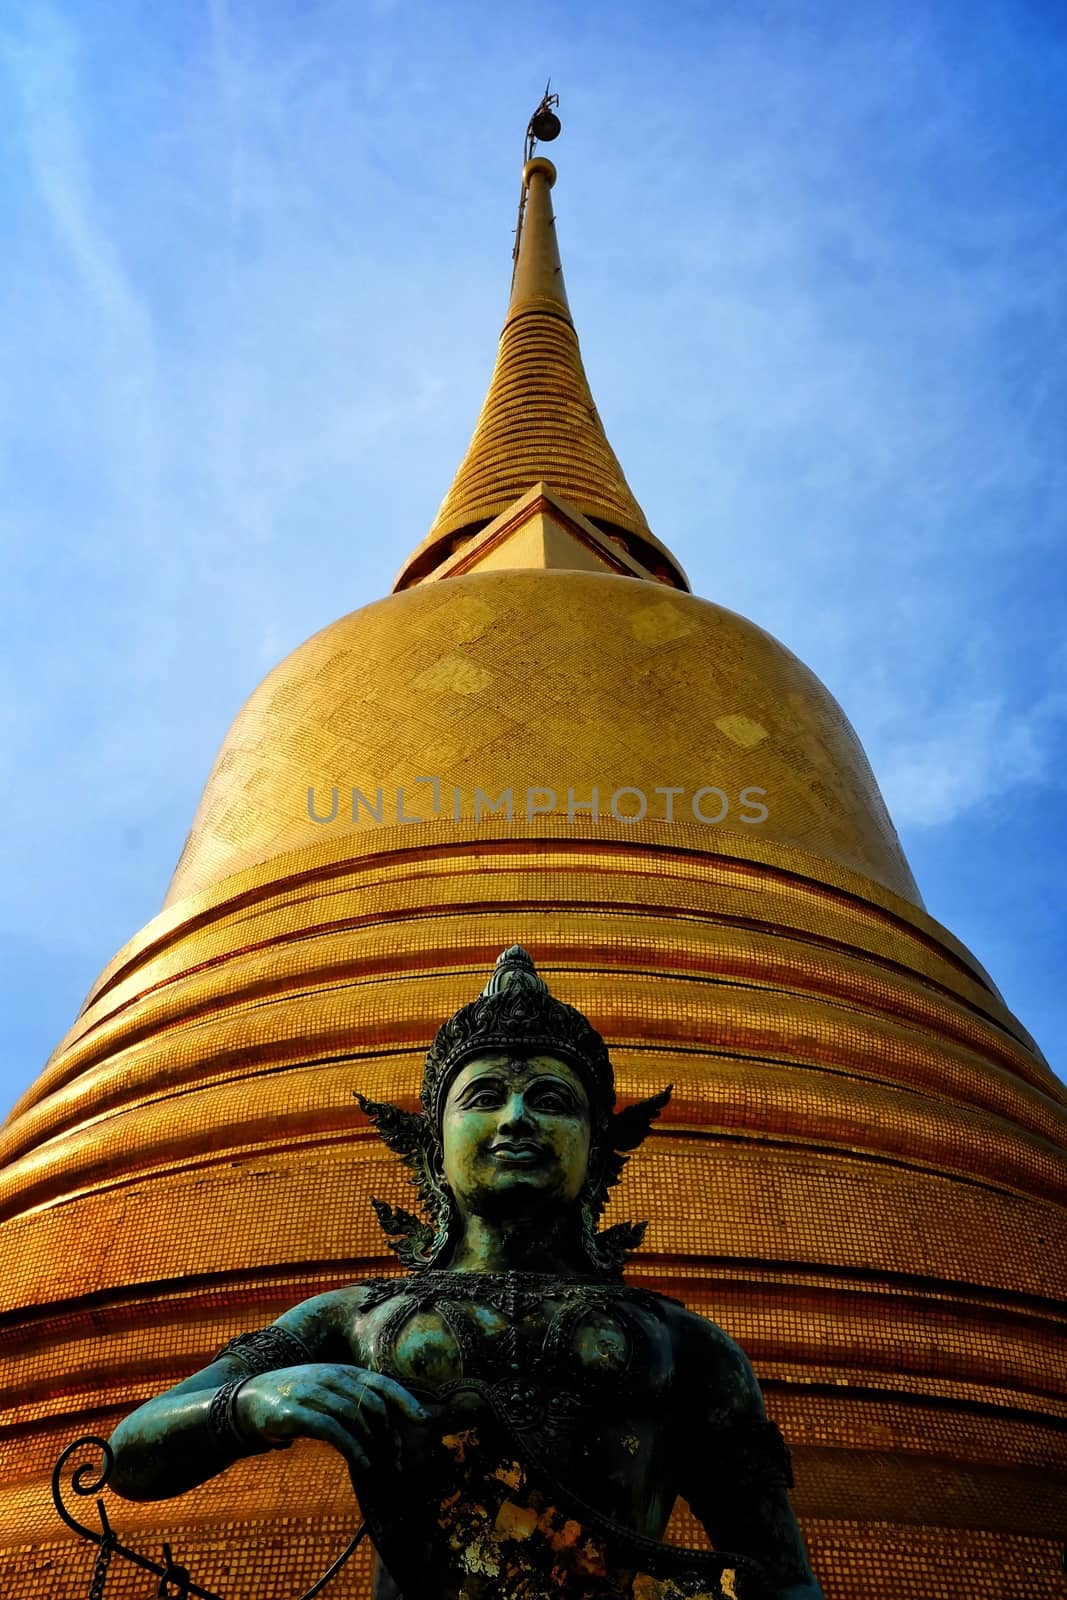 Ancient Thai Angel Statue on Temple of the Golden Mount at Wat Saket Temple Bangkok, Thailand. by mesamong